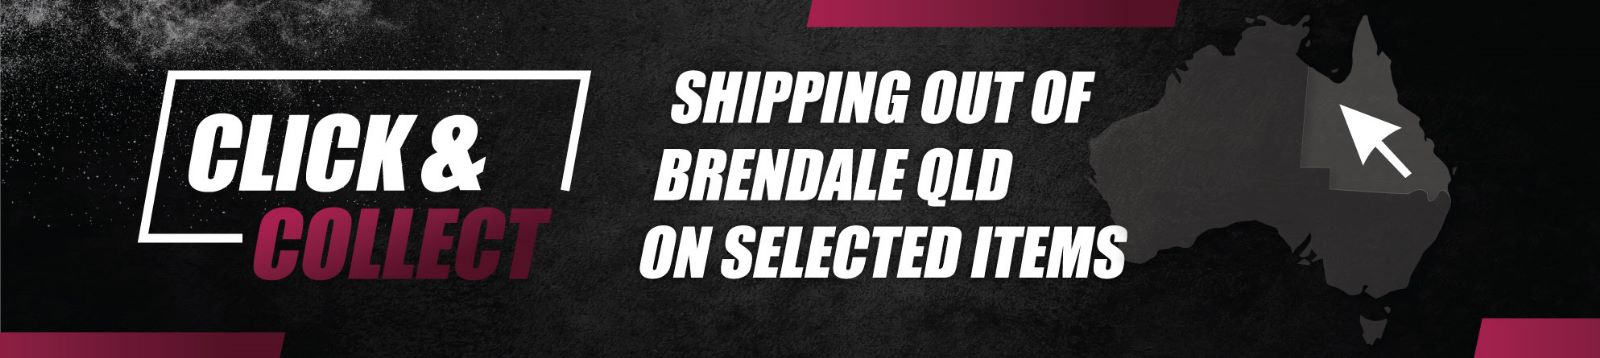 Brendale QLD Warehouse Banner